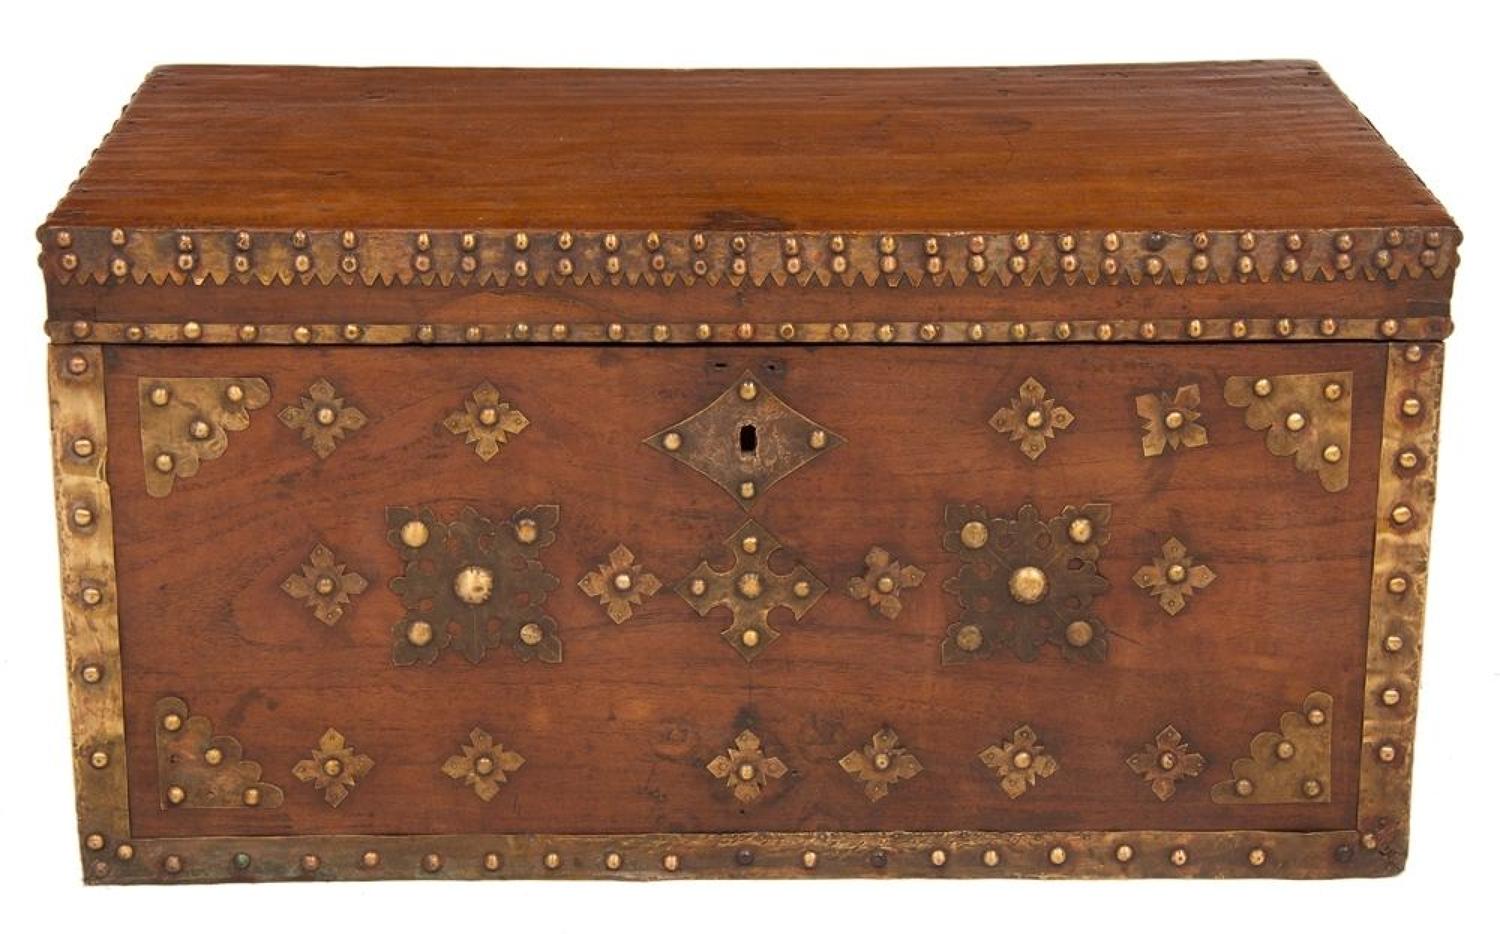 A studded military campaign chest